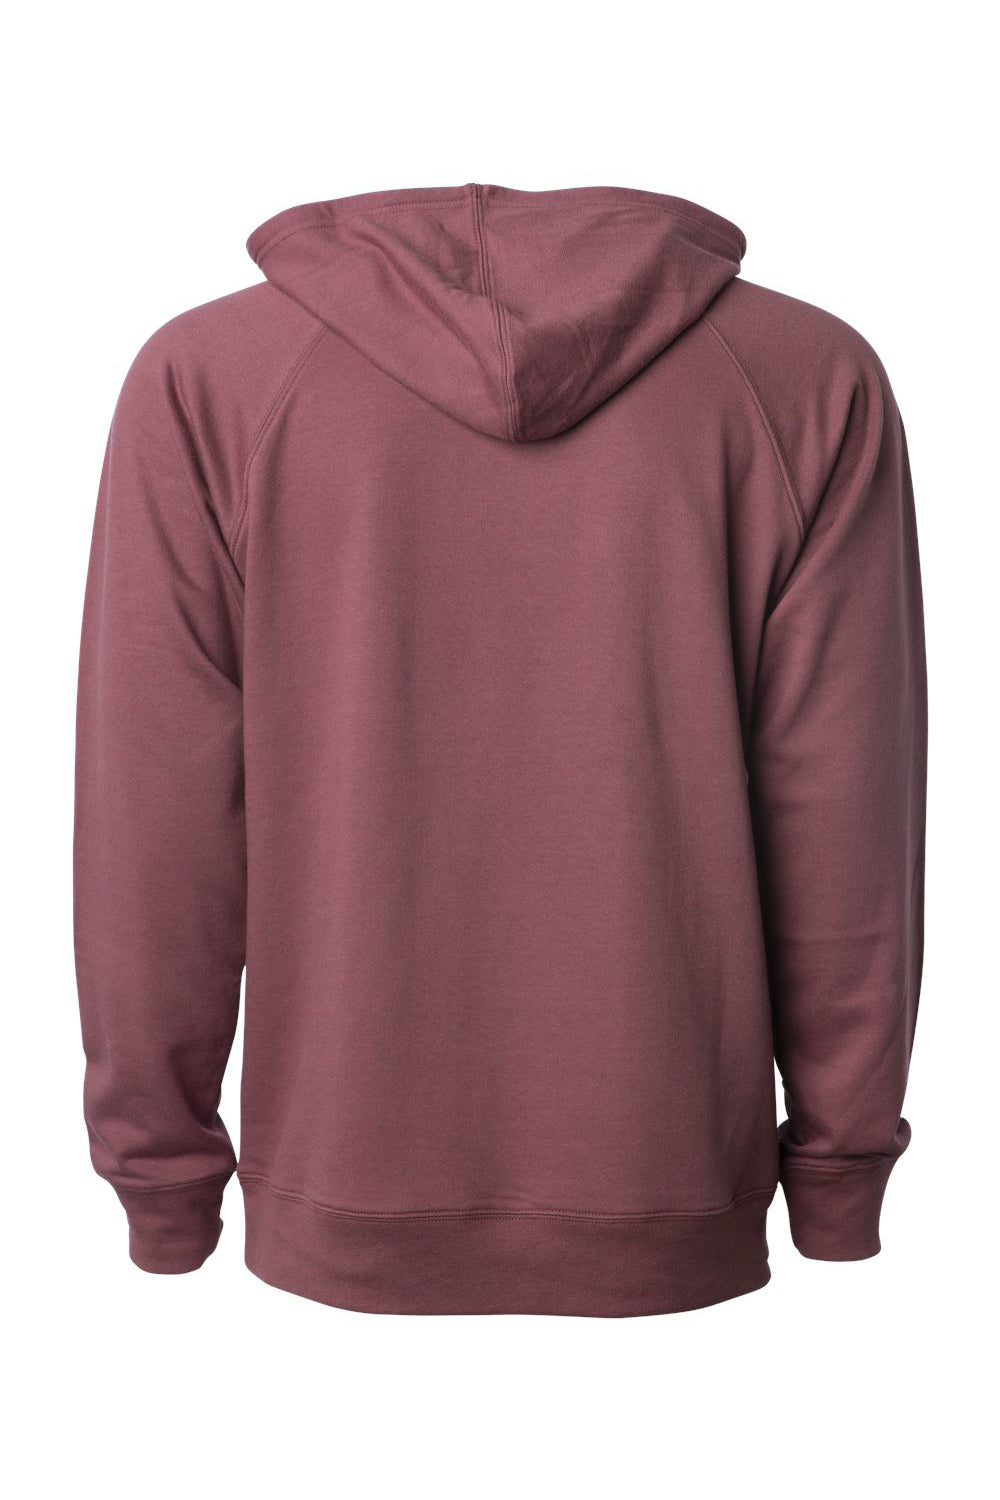 Independent Trading Co. SS1000 Mens Icon Loopback Terry Hooded Sweatshirt Hoodie Port Flat Back